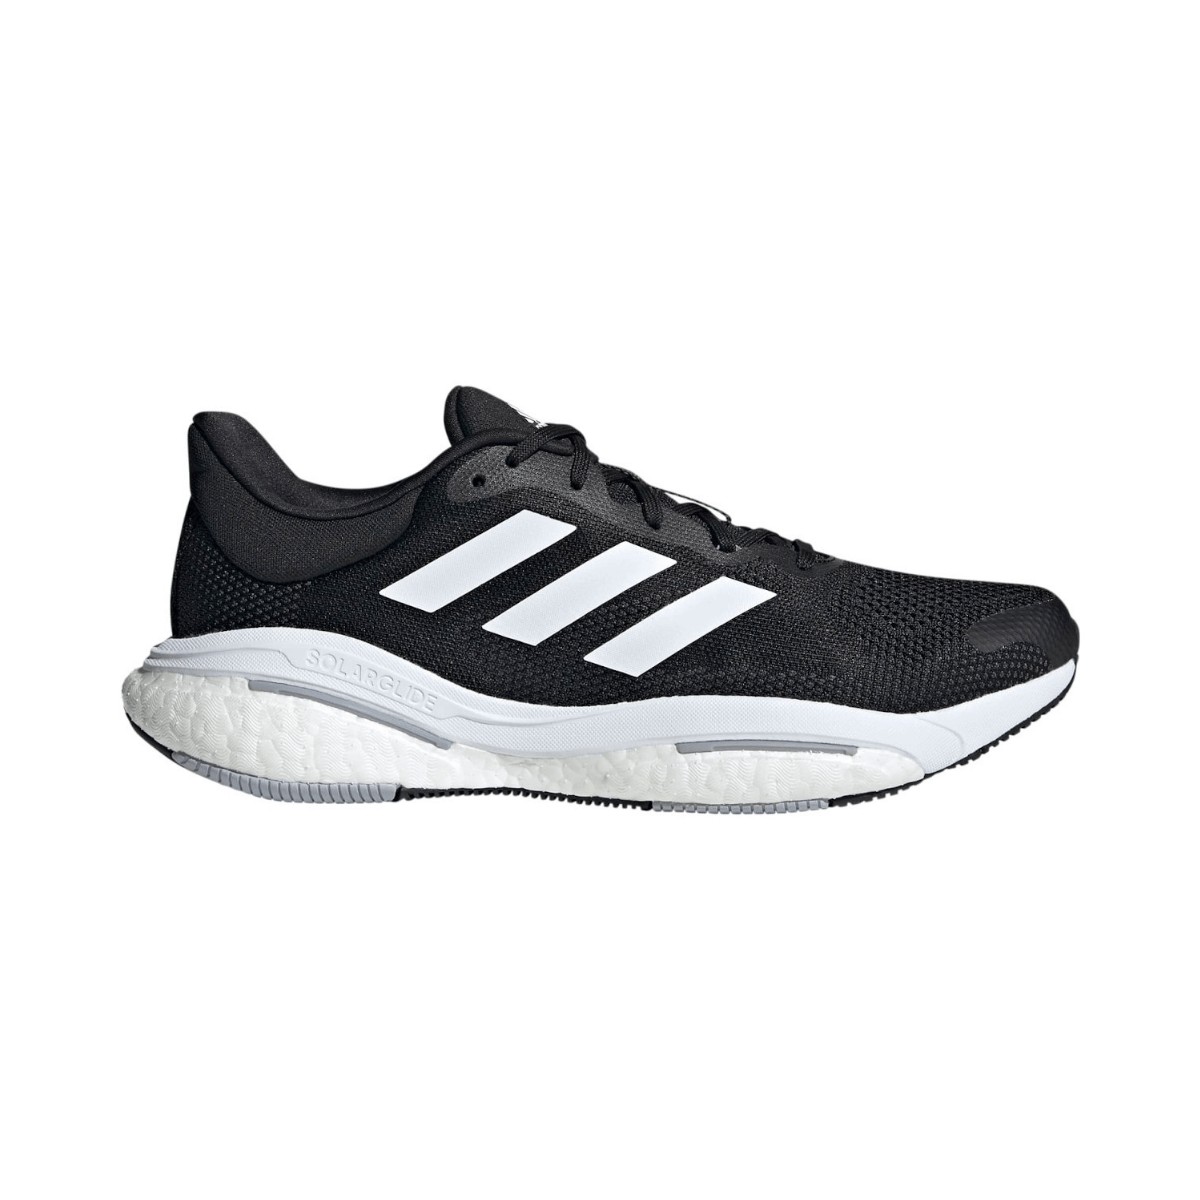 Chaussures Adidas Solar Glide 5 Noir AW22, Taille UK 8